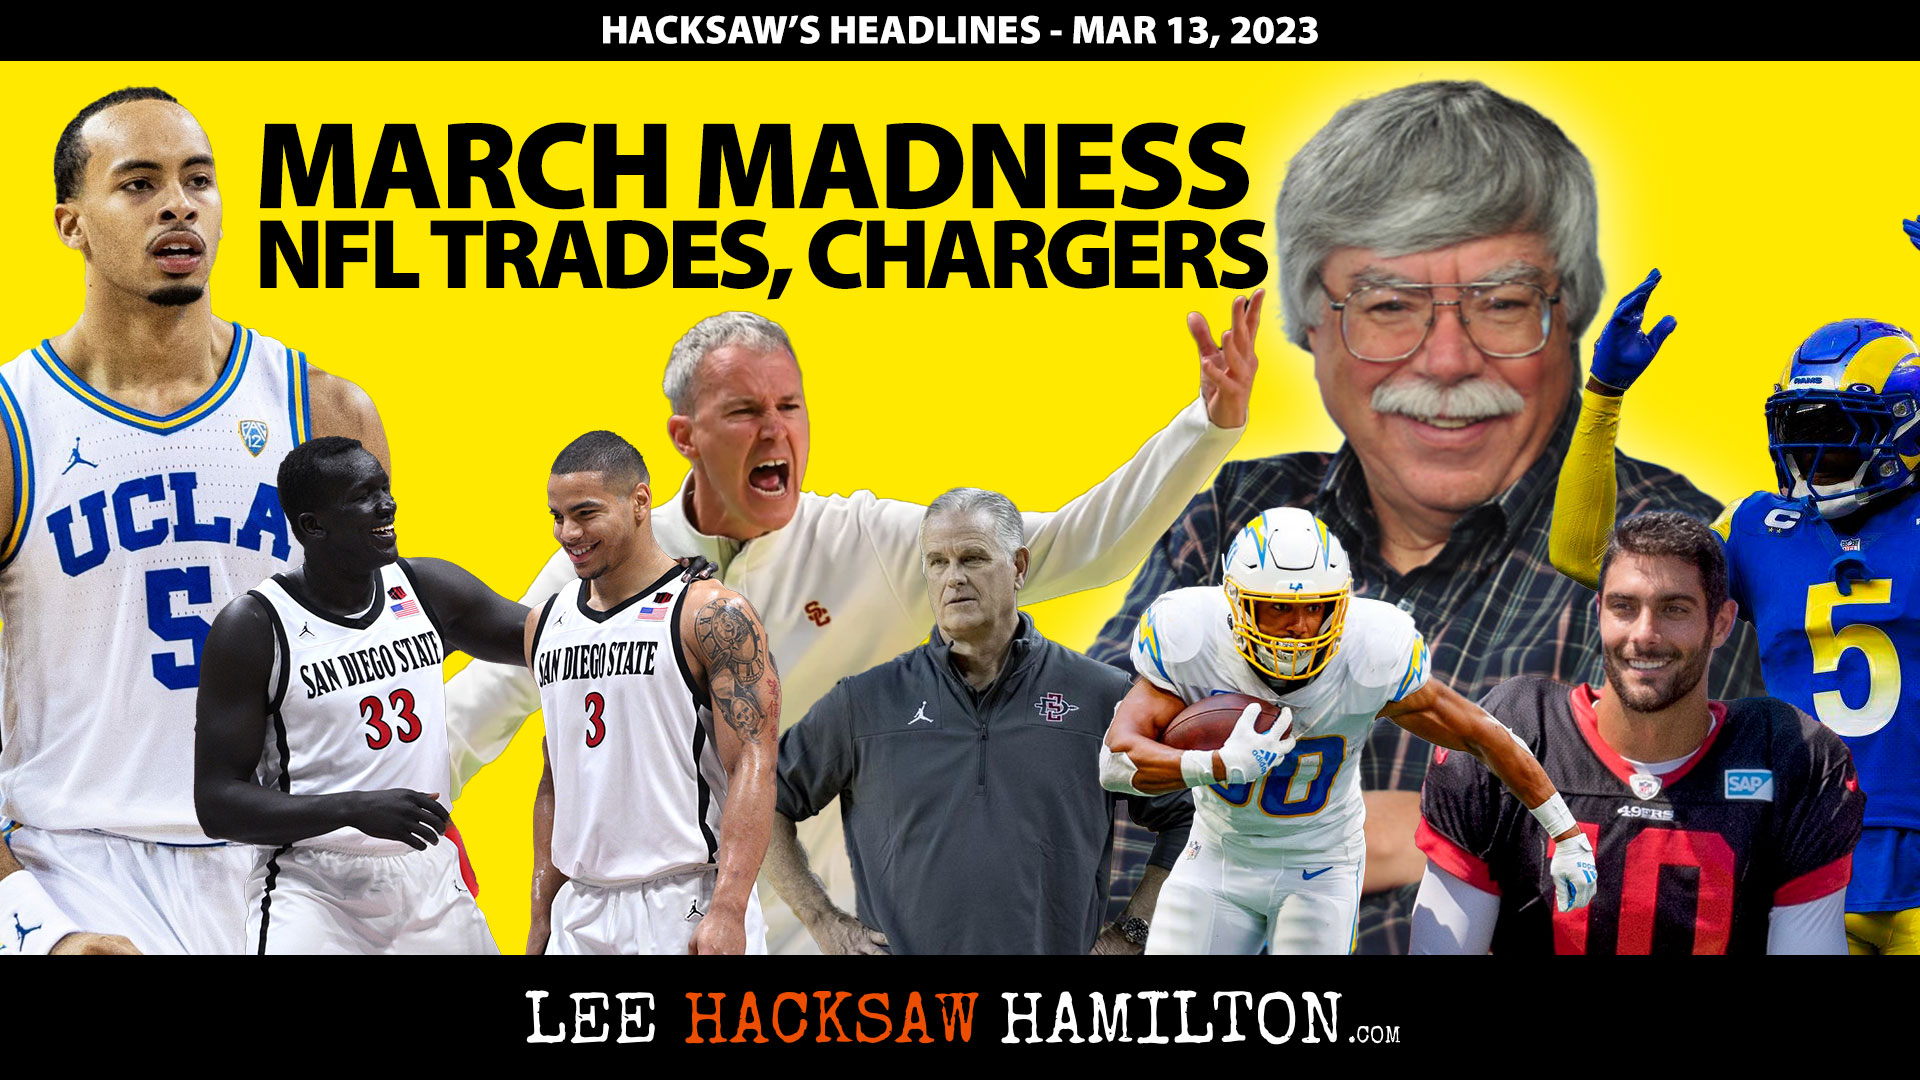 Lee Hacksaw Hamilton discusses March Madness Preview, SDSU, UCLA, USC, Chargers Problems, NFL Trades and Free Agent Signings